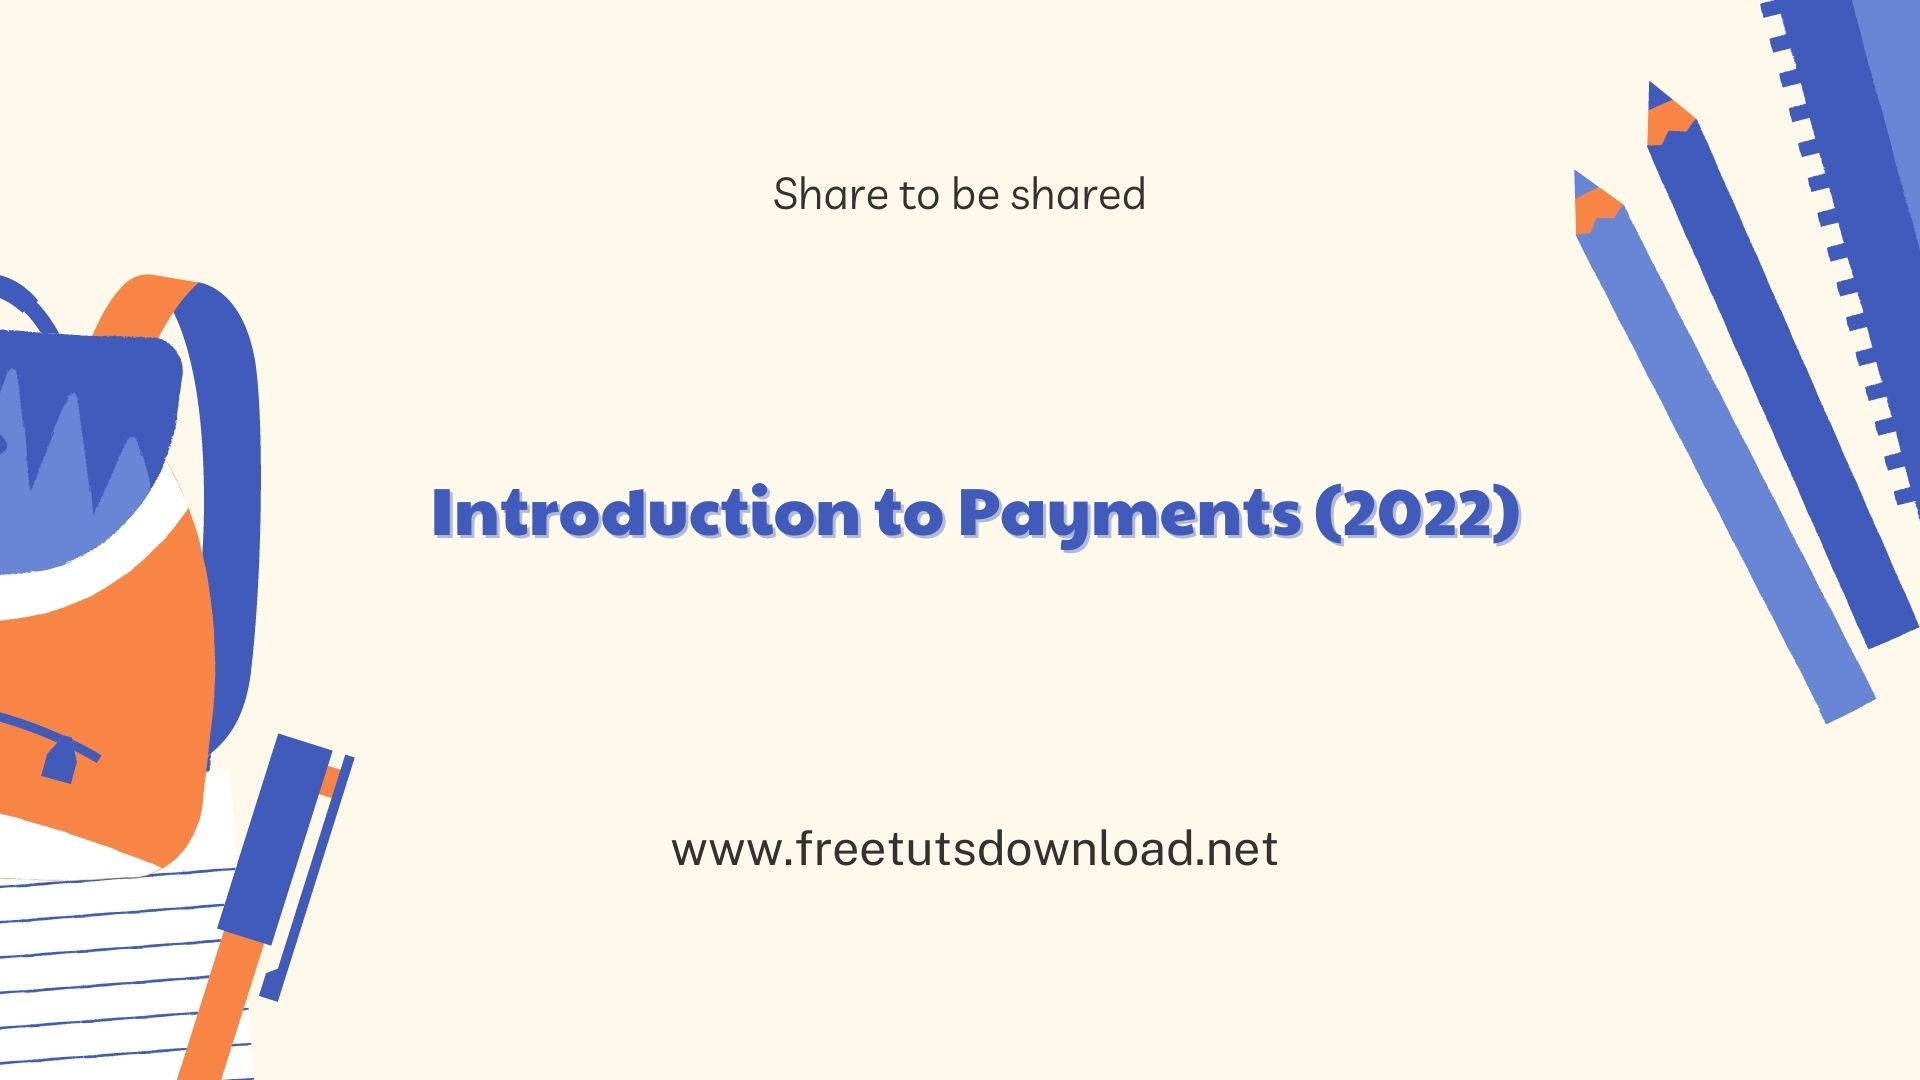 Introduction to Payments (2022)